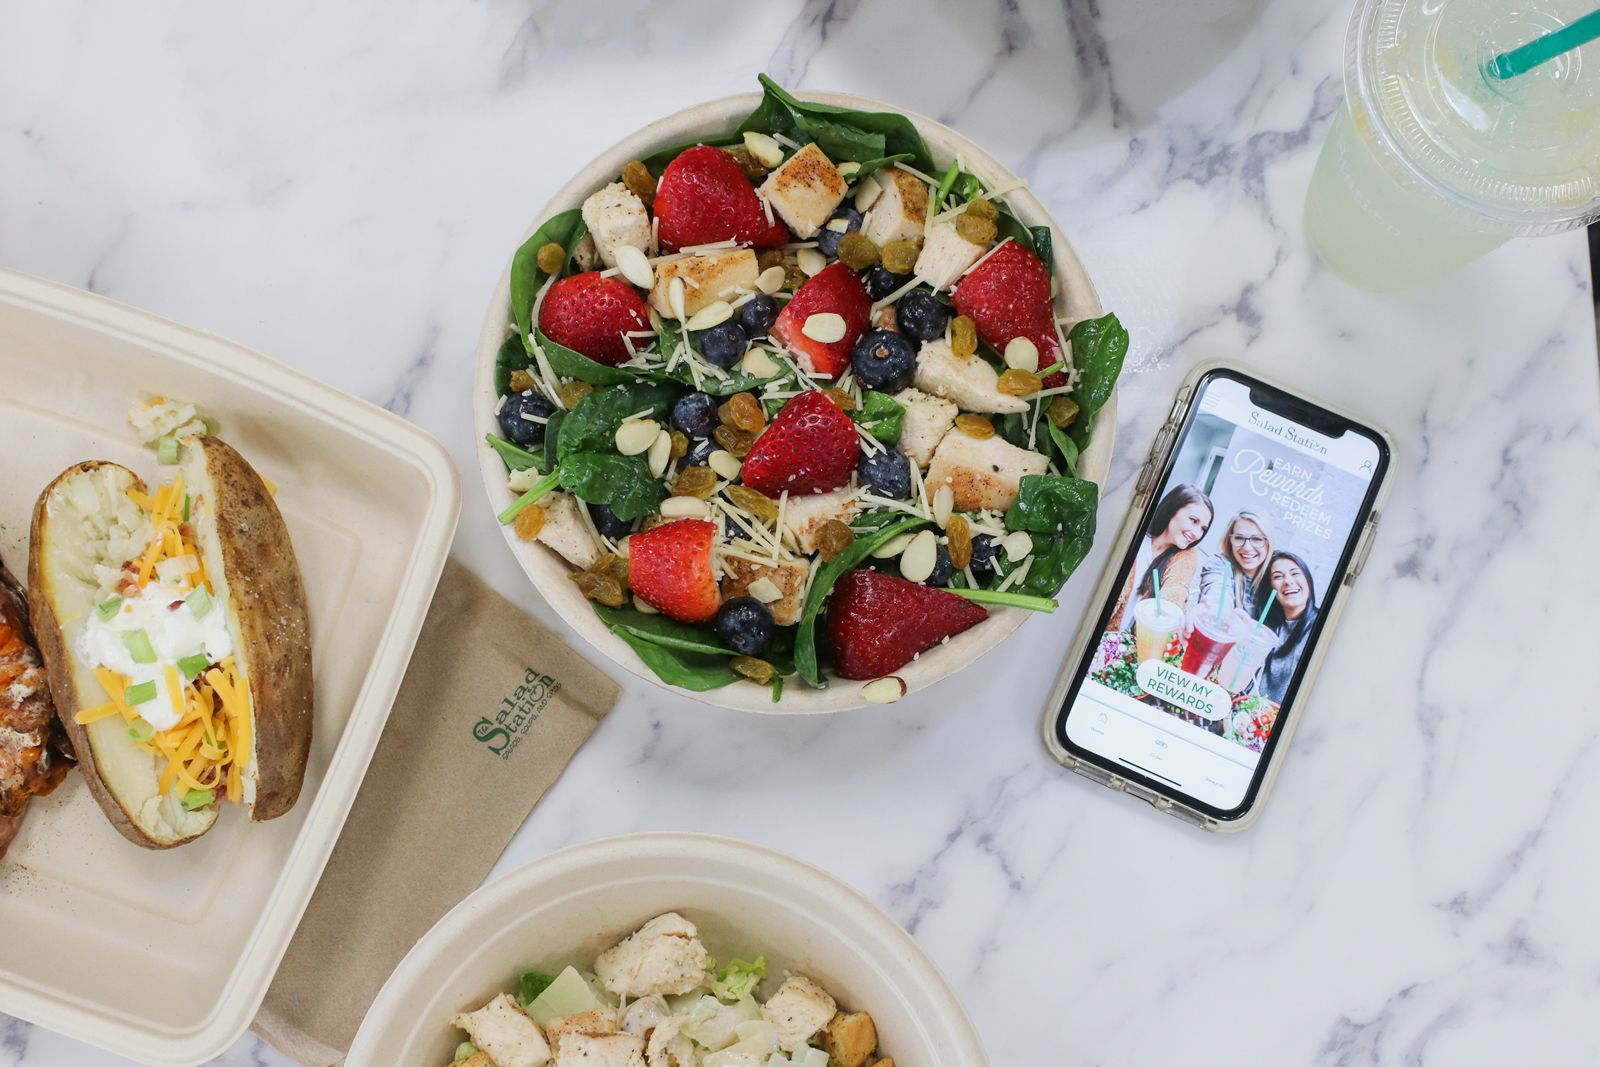 Inspired by Salad Station's Mother & Son Founders, This Father-Daughter Duo Decided To Invest in the Franchise Themselves